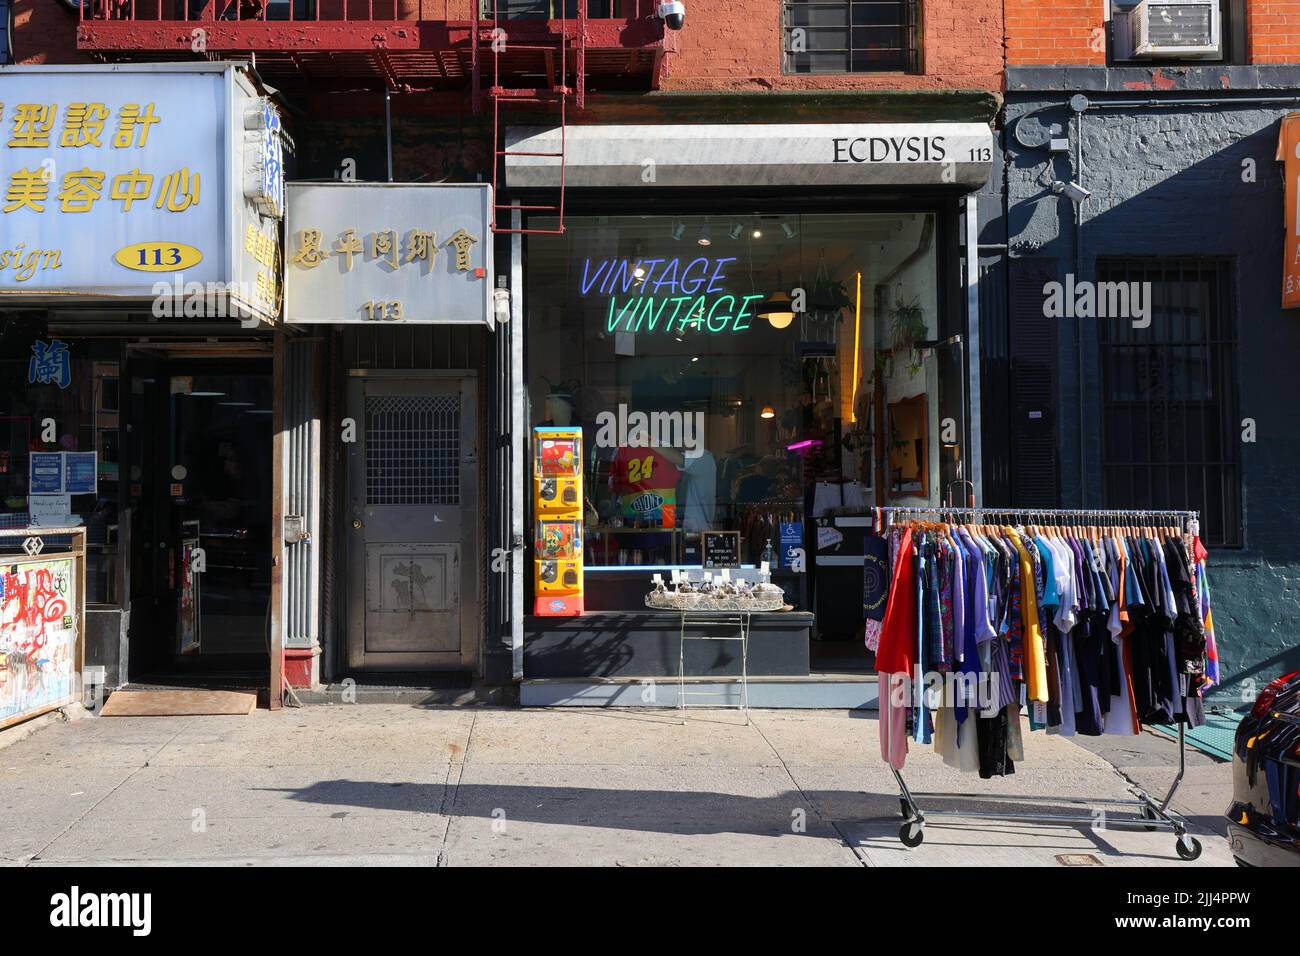 ECDYSIS, 113 Division St, New York, NY. exterior storefront of a vintage clothing store in Manhattan Chinatown/Lower East Side. Stock Photo